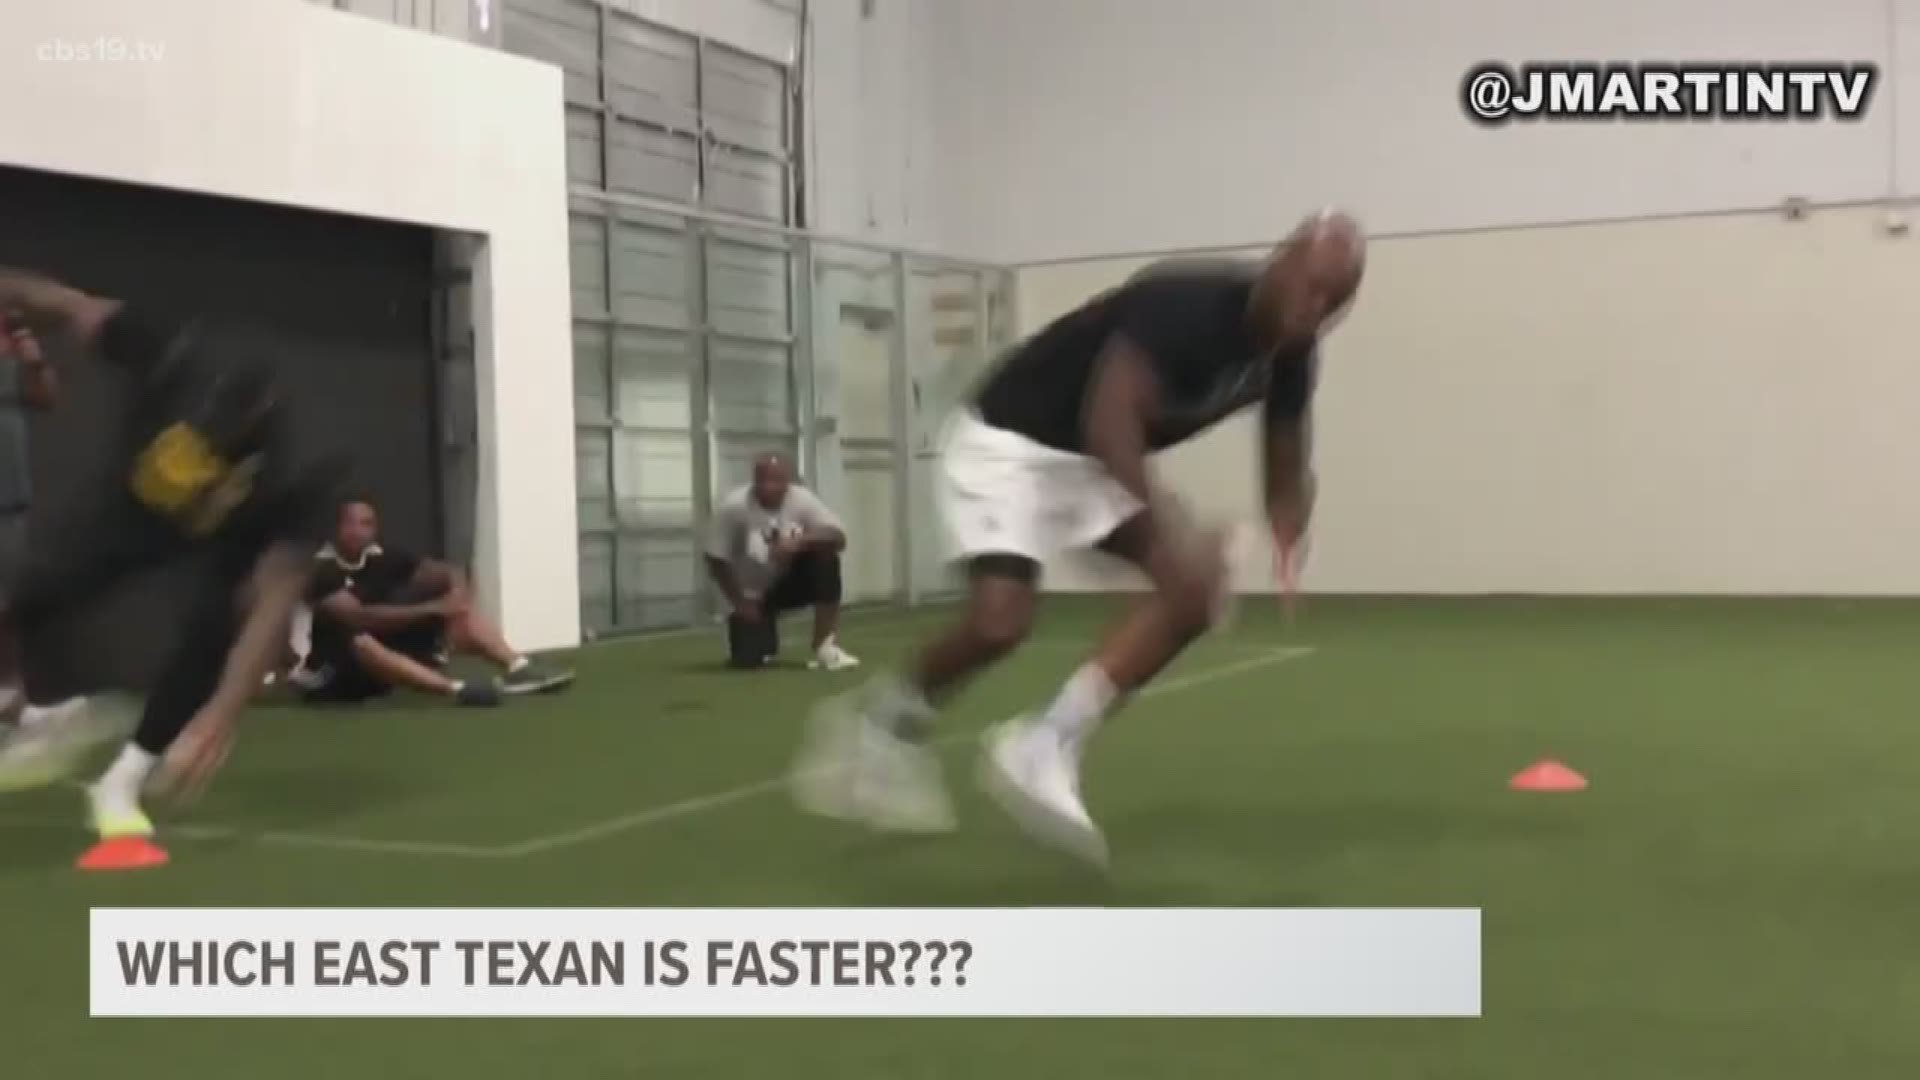 Two East Texas NFL stars race each other in drill